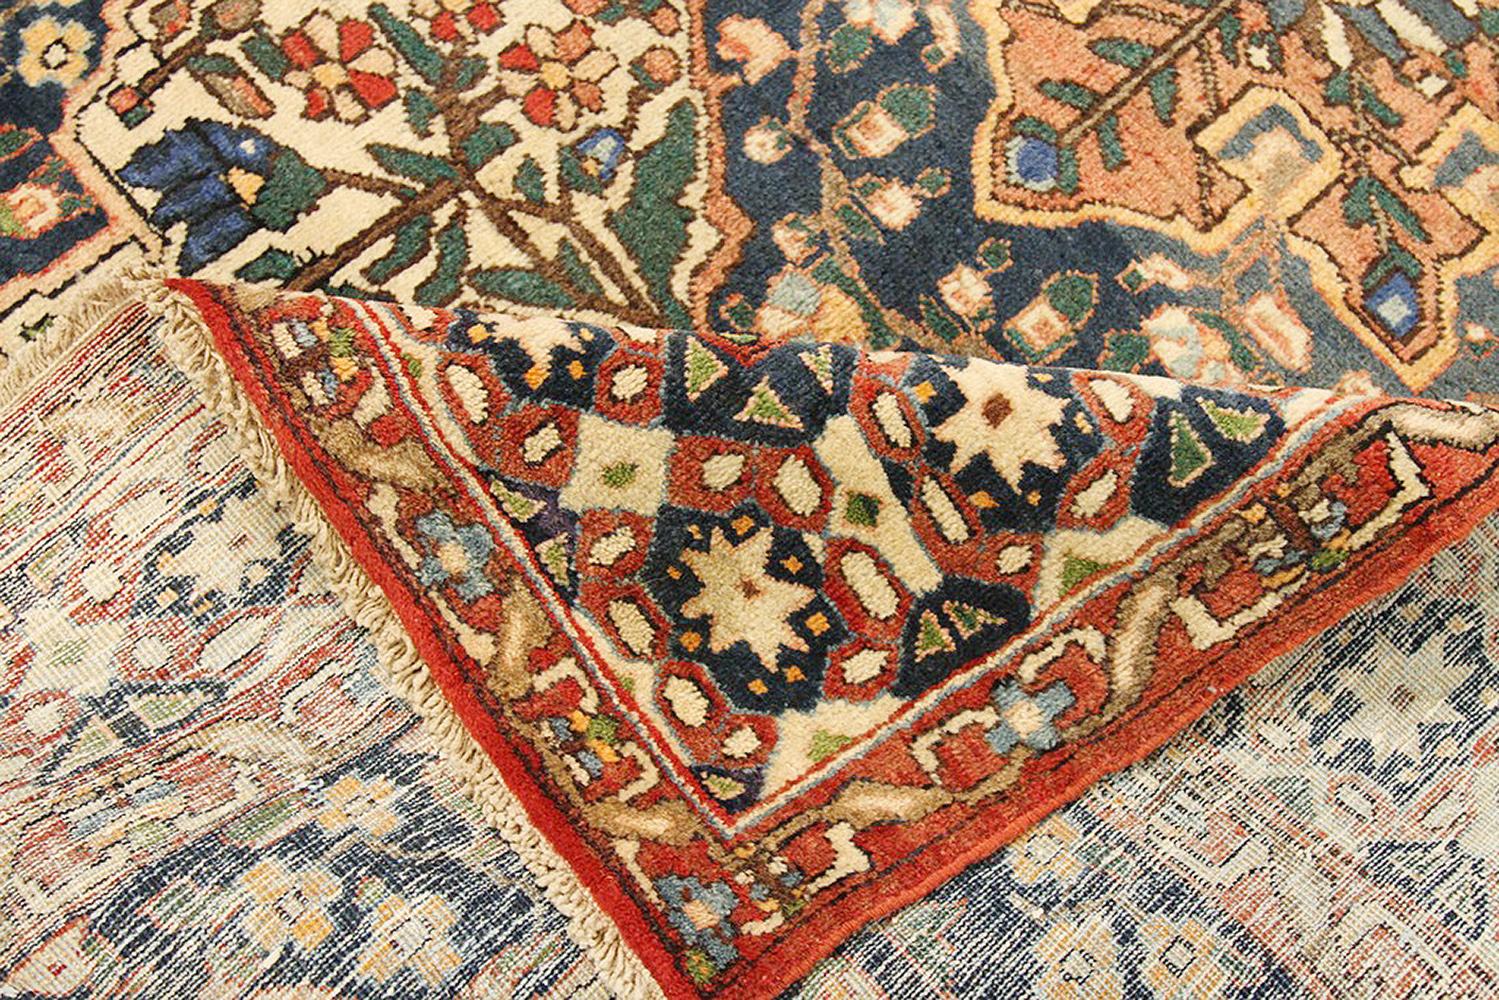 Islamic Antique Persian Bakhtiar Rug with Green and Blue Floral Details on Ivory Field For Sale